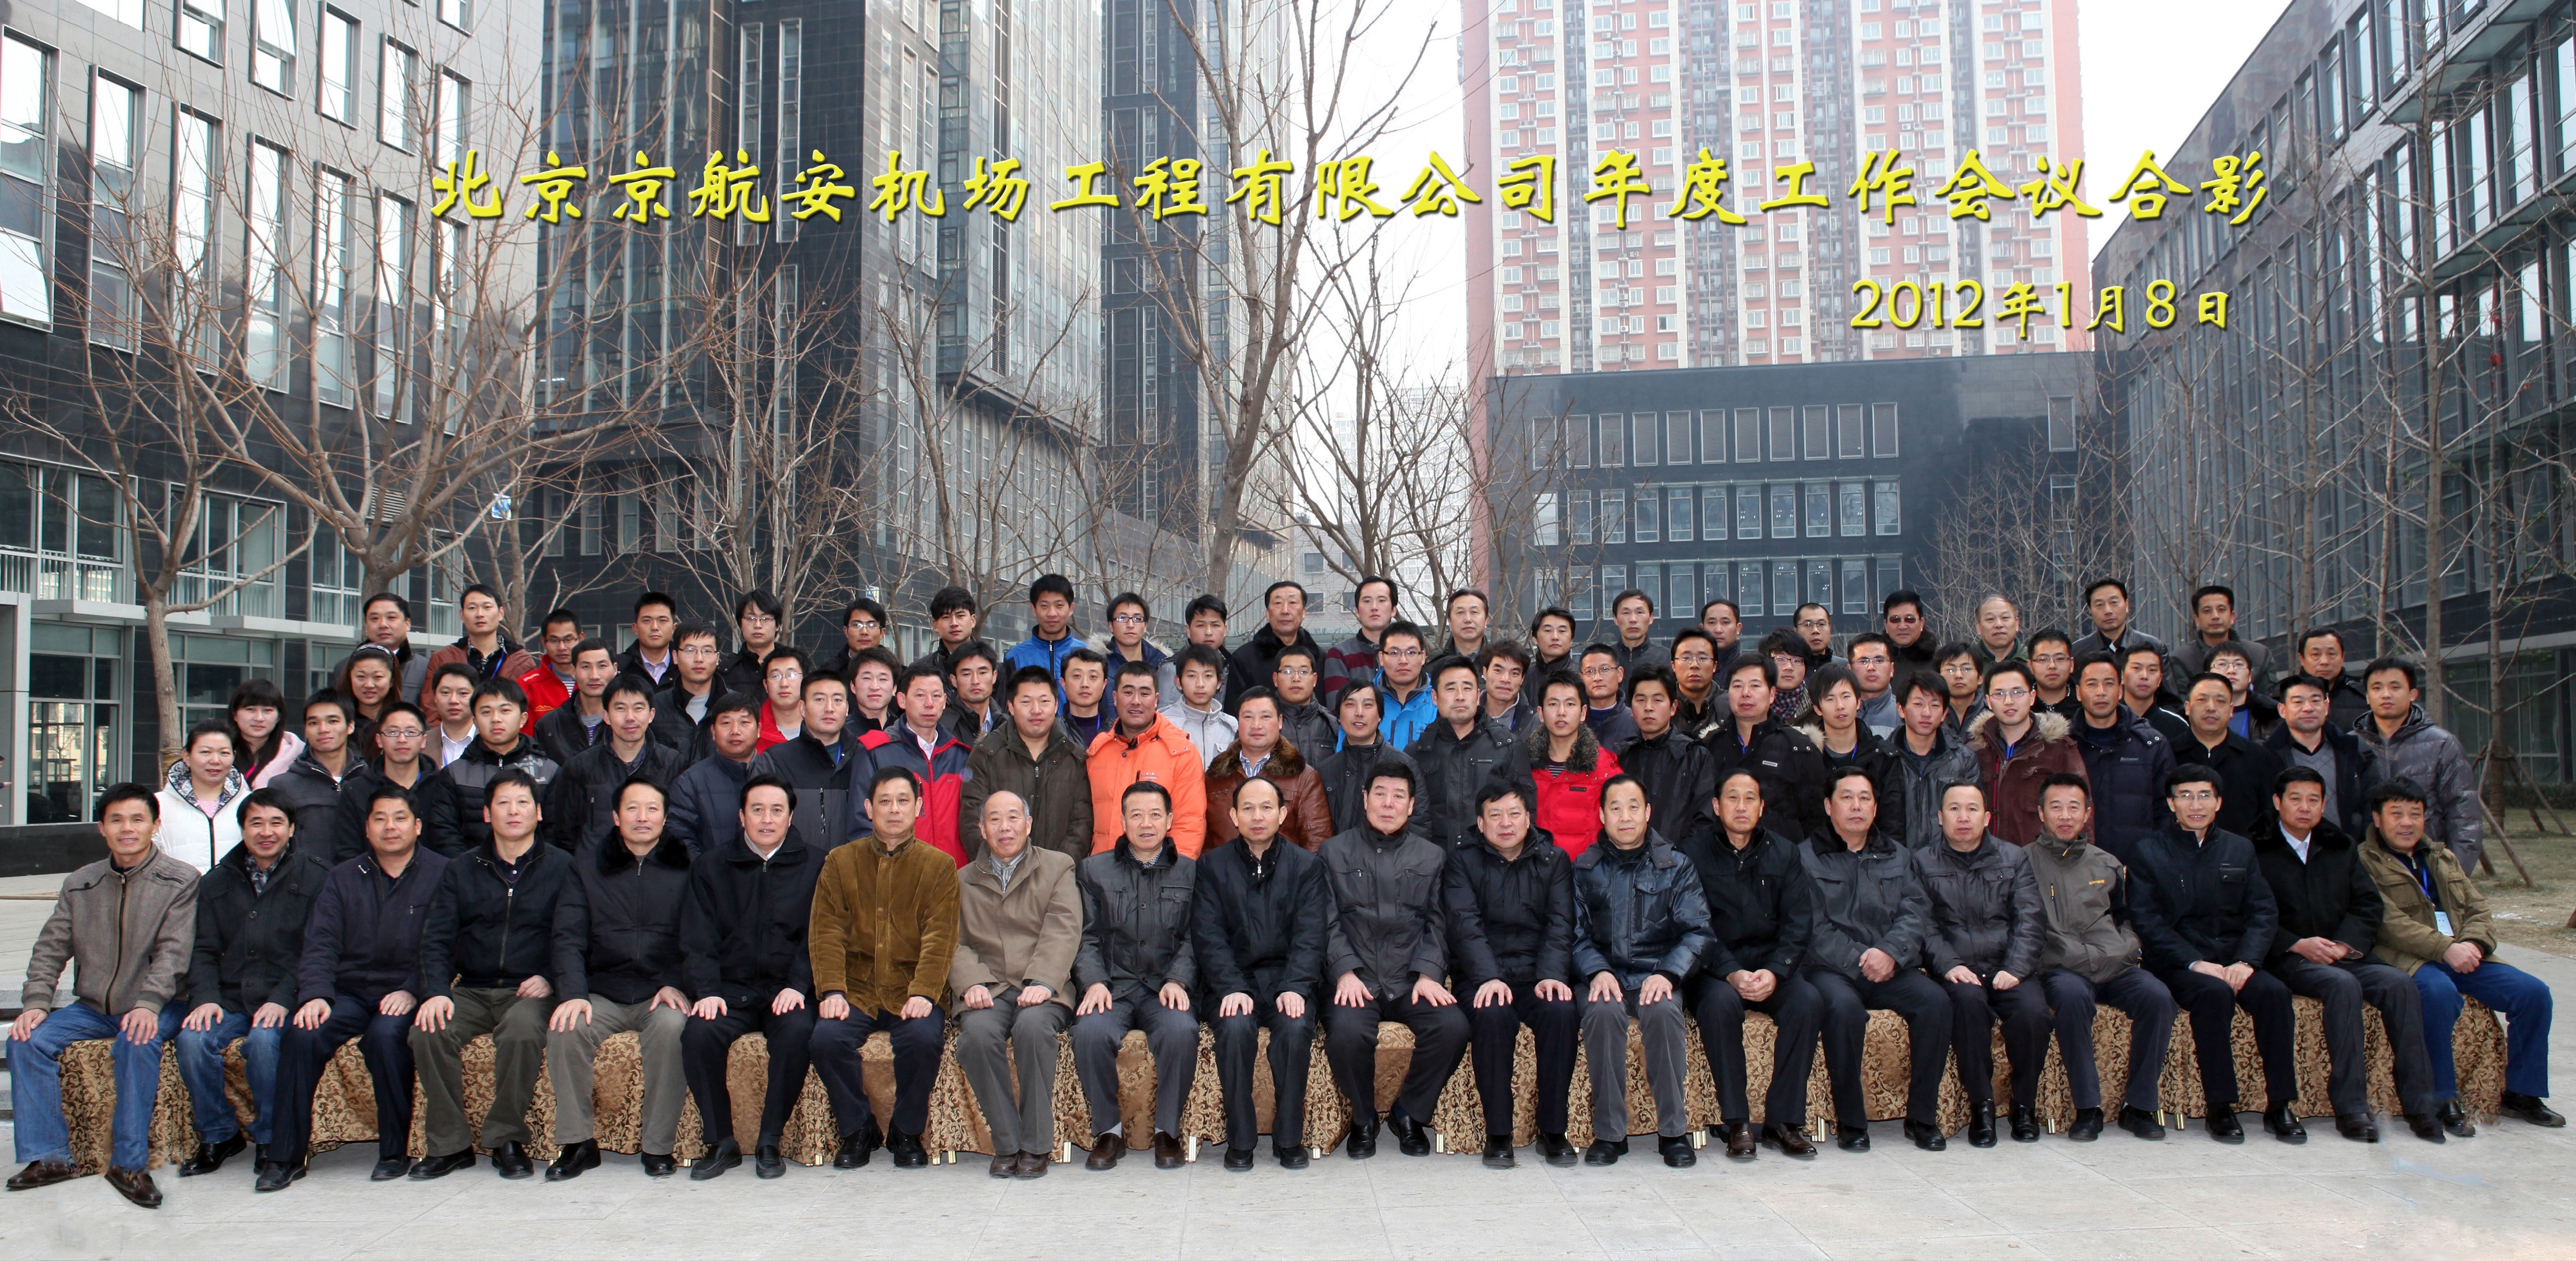 Group photo of 2012 annual meeting